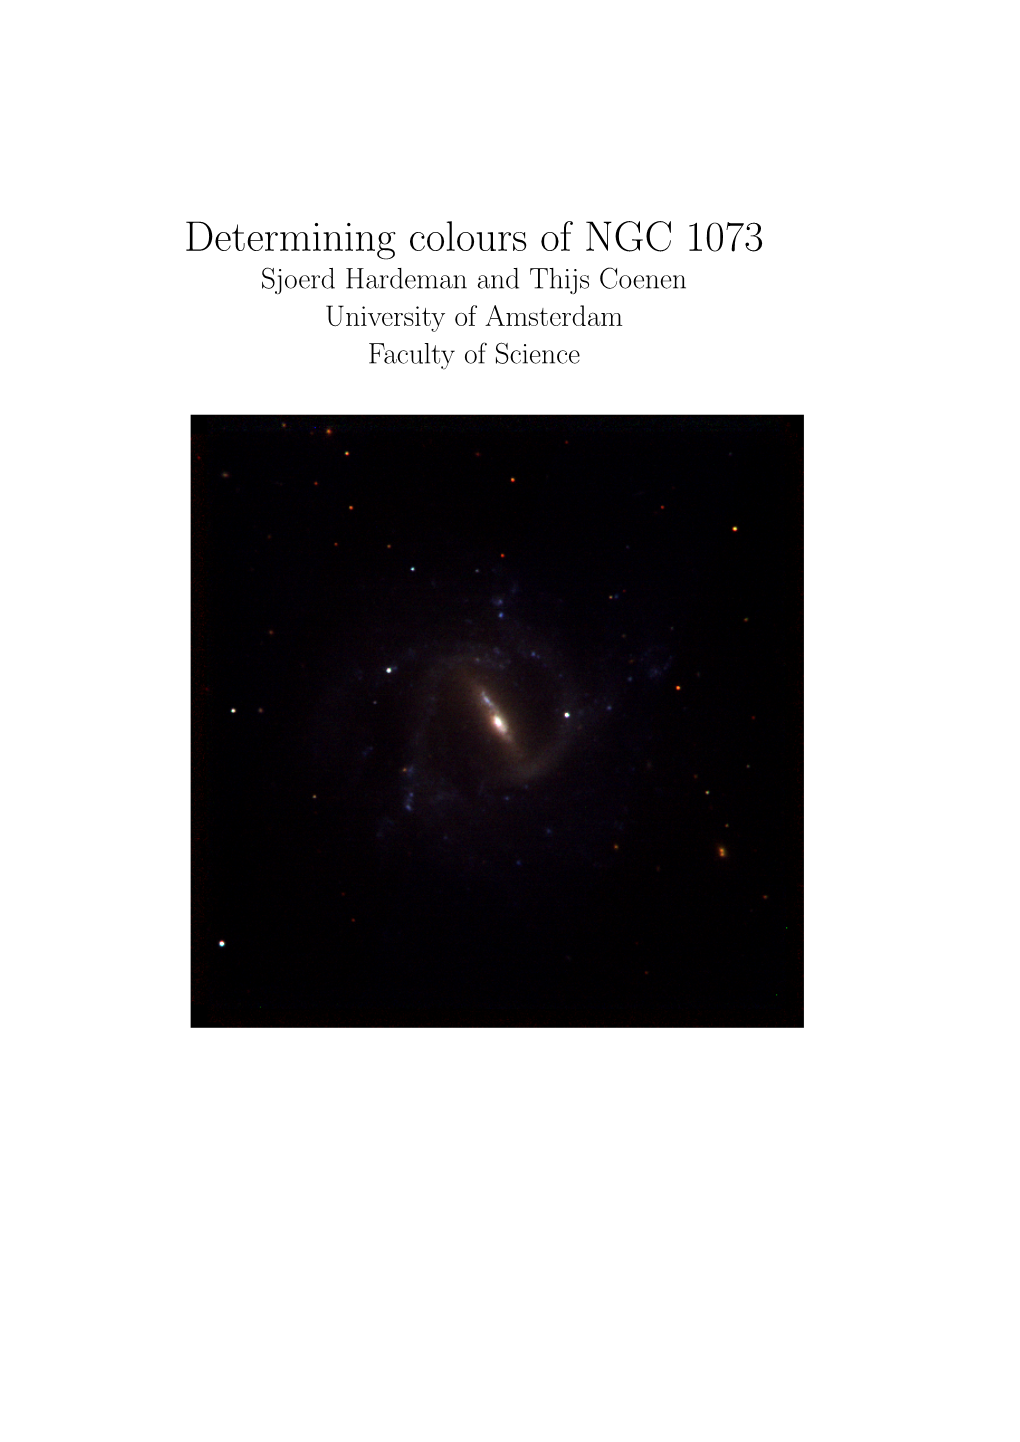 Determining Colours of NGC 1073 Sjoerd Hardeman and Thijs Coenen University of Amsterdam Faculty of Science Determining Colours of NGC 1073